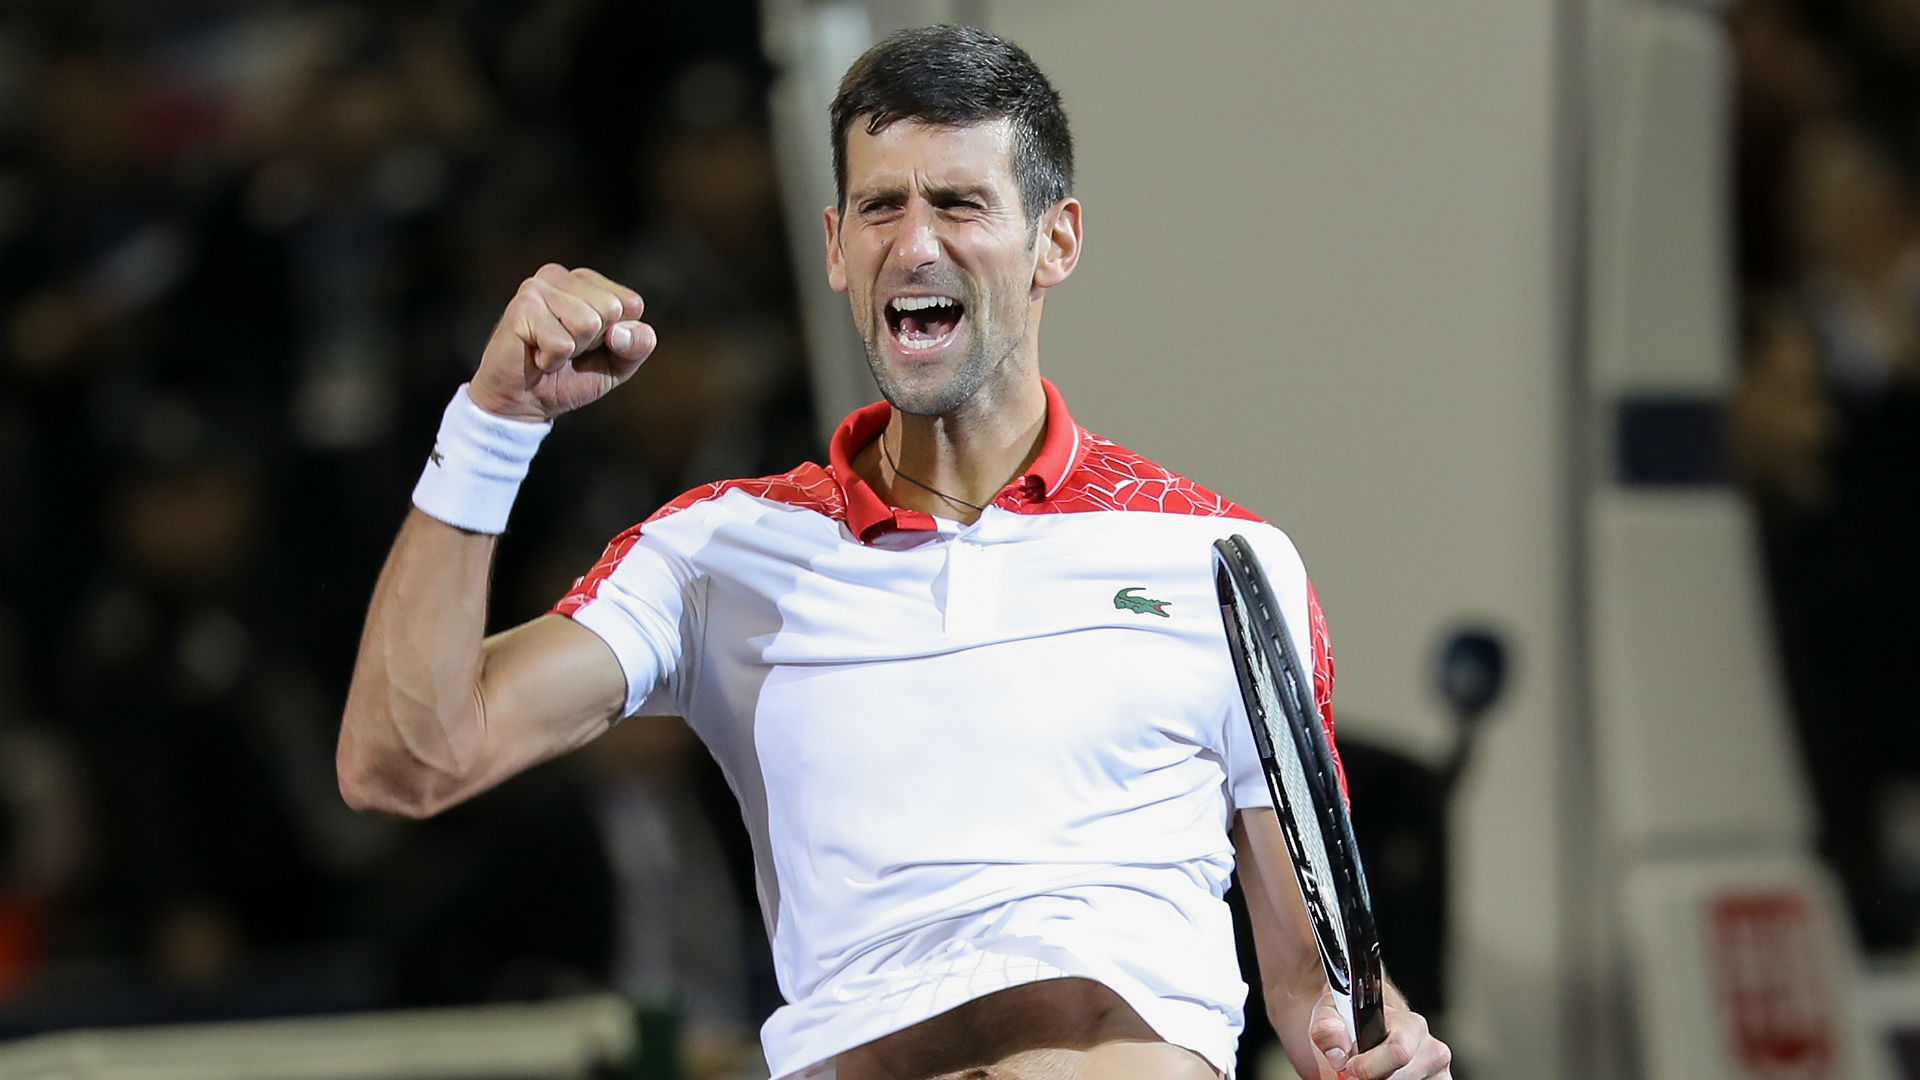 Novak Djokovic was at a low ebb after his French Open exit, but the Serbian has experienced an incredible upturn in fortunes.